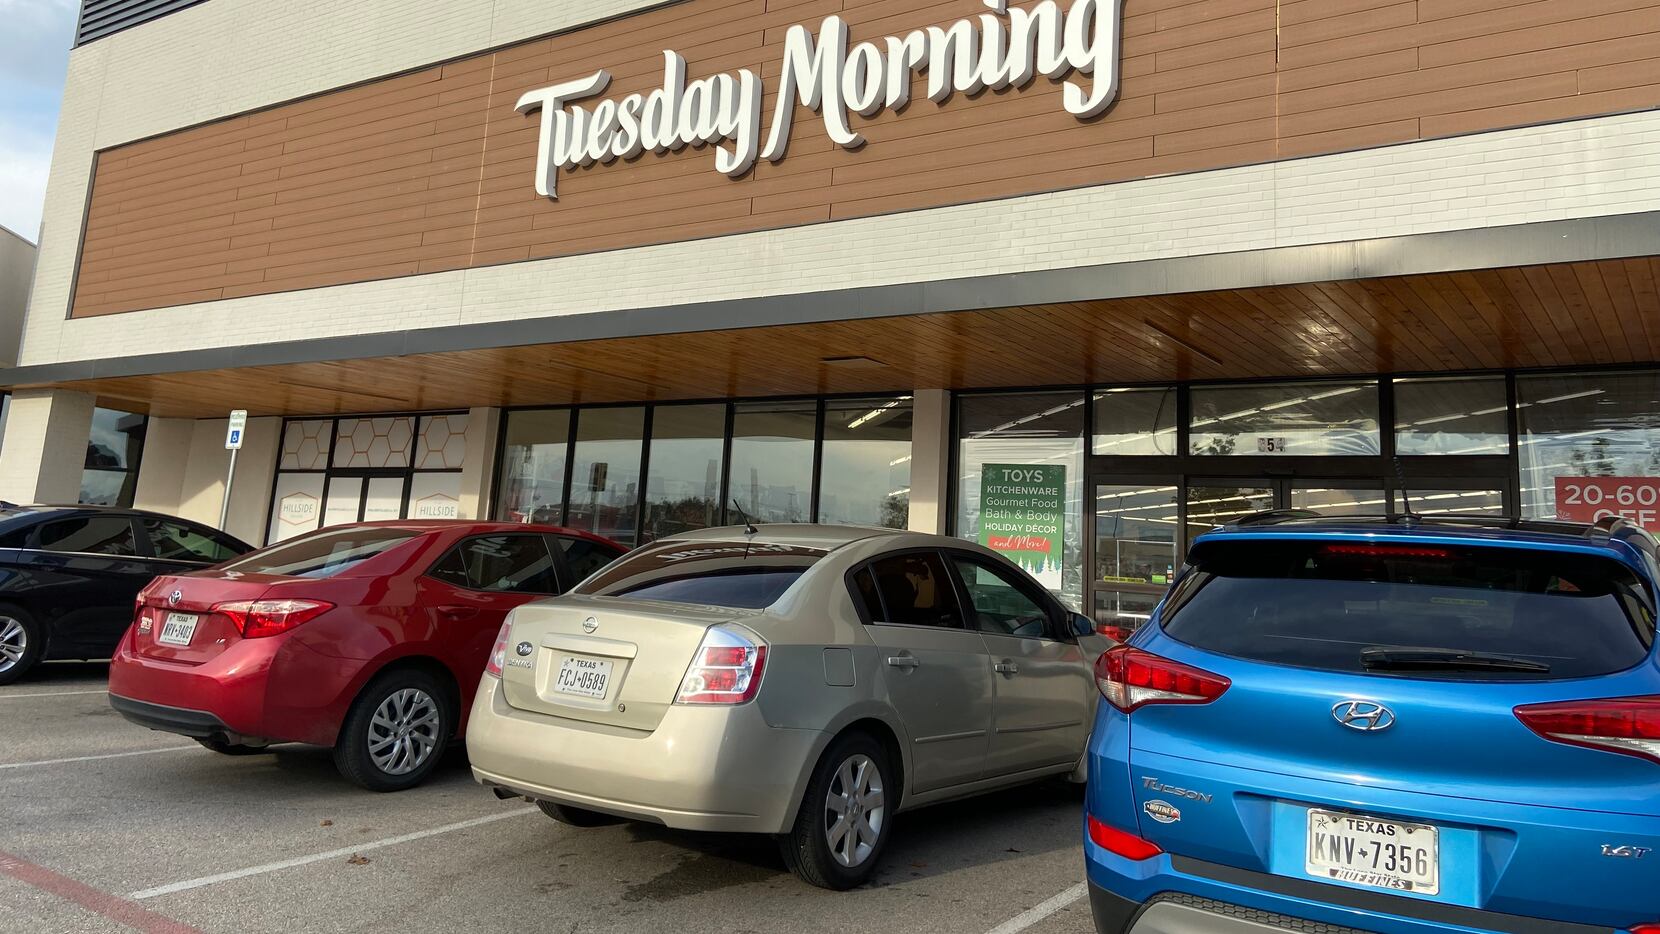 All Tuesday Morning locations to close by end of June, brand assets for  sale - Houston Business Journal